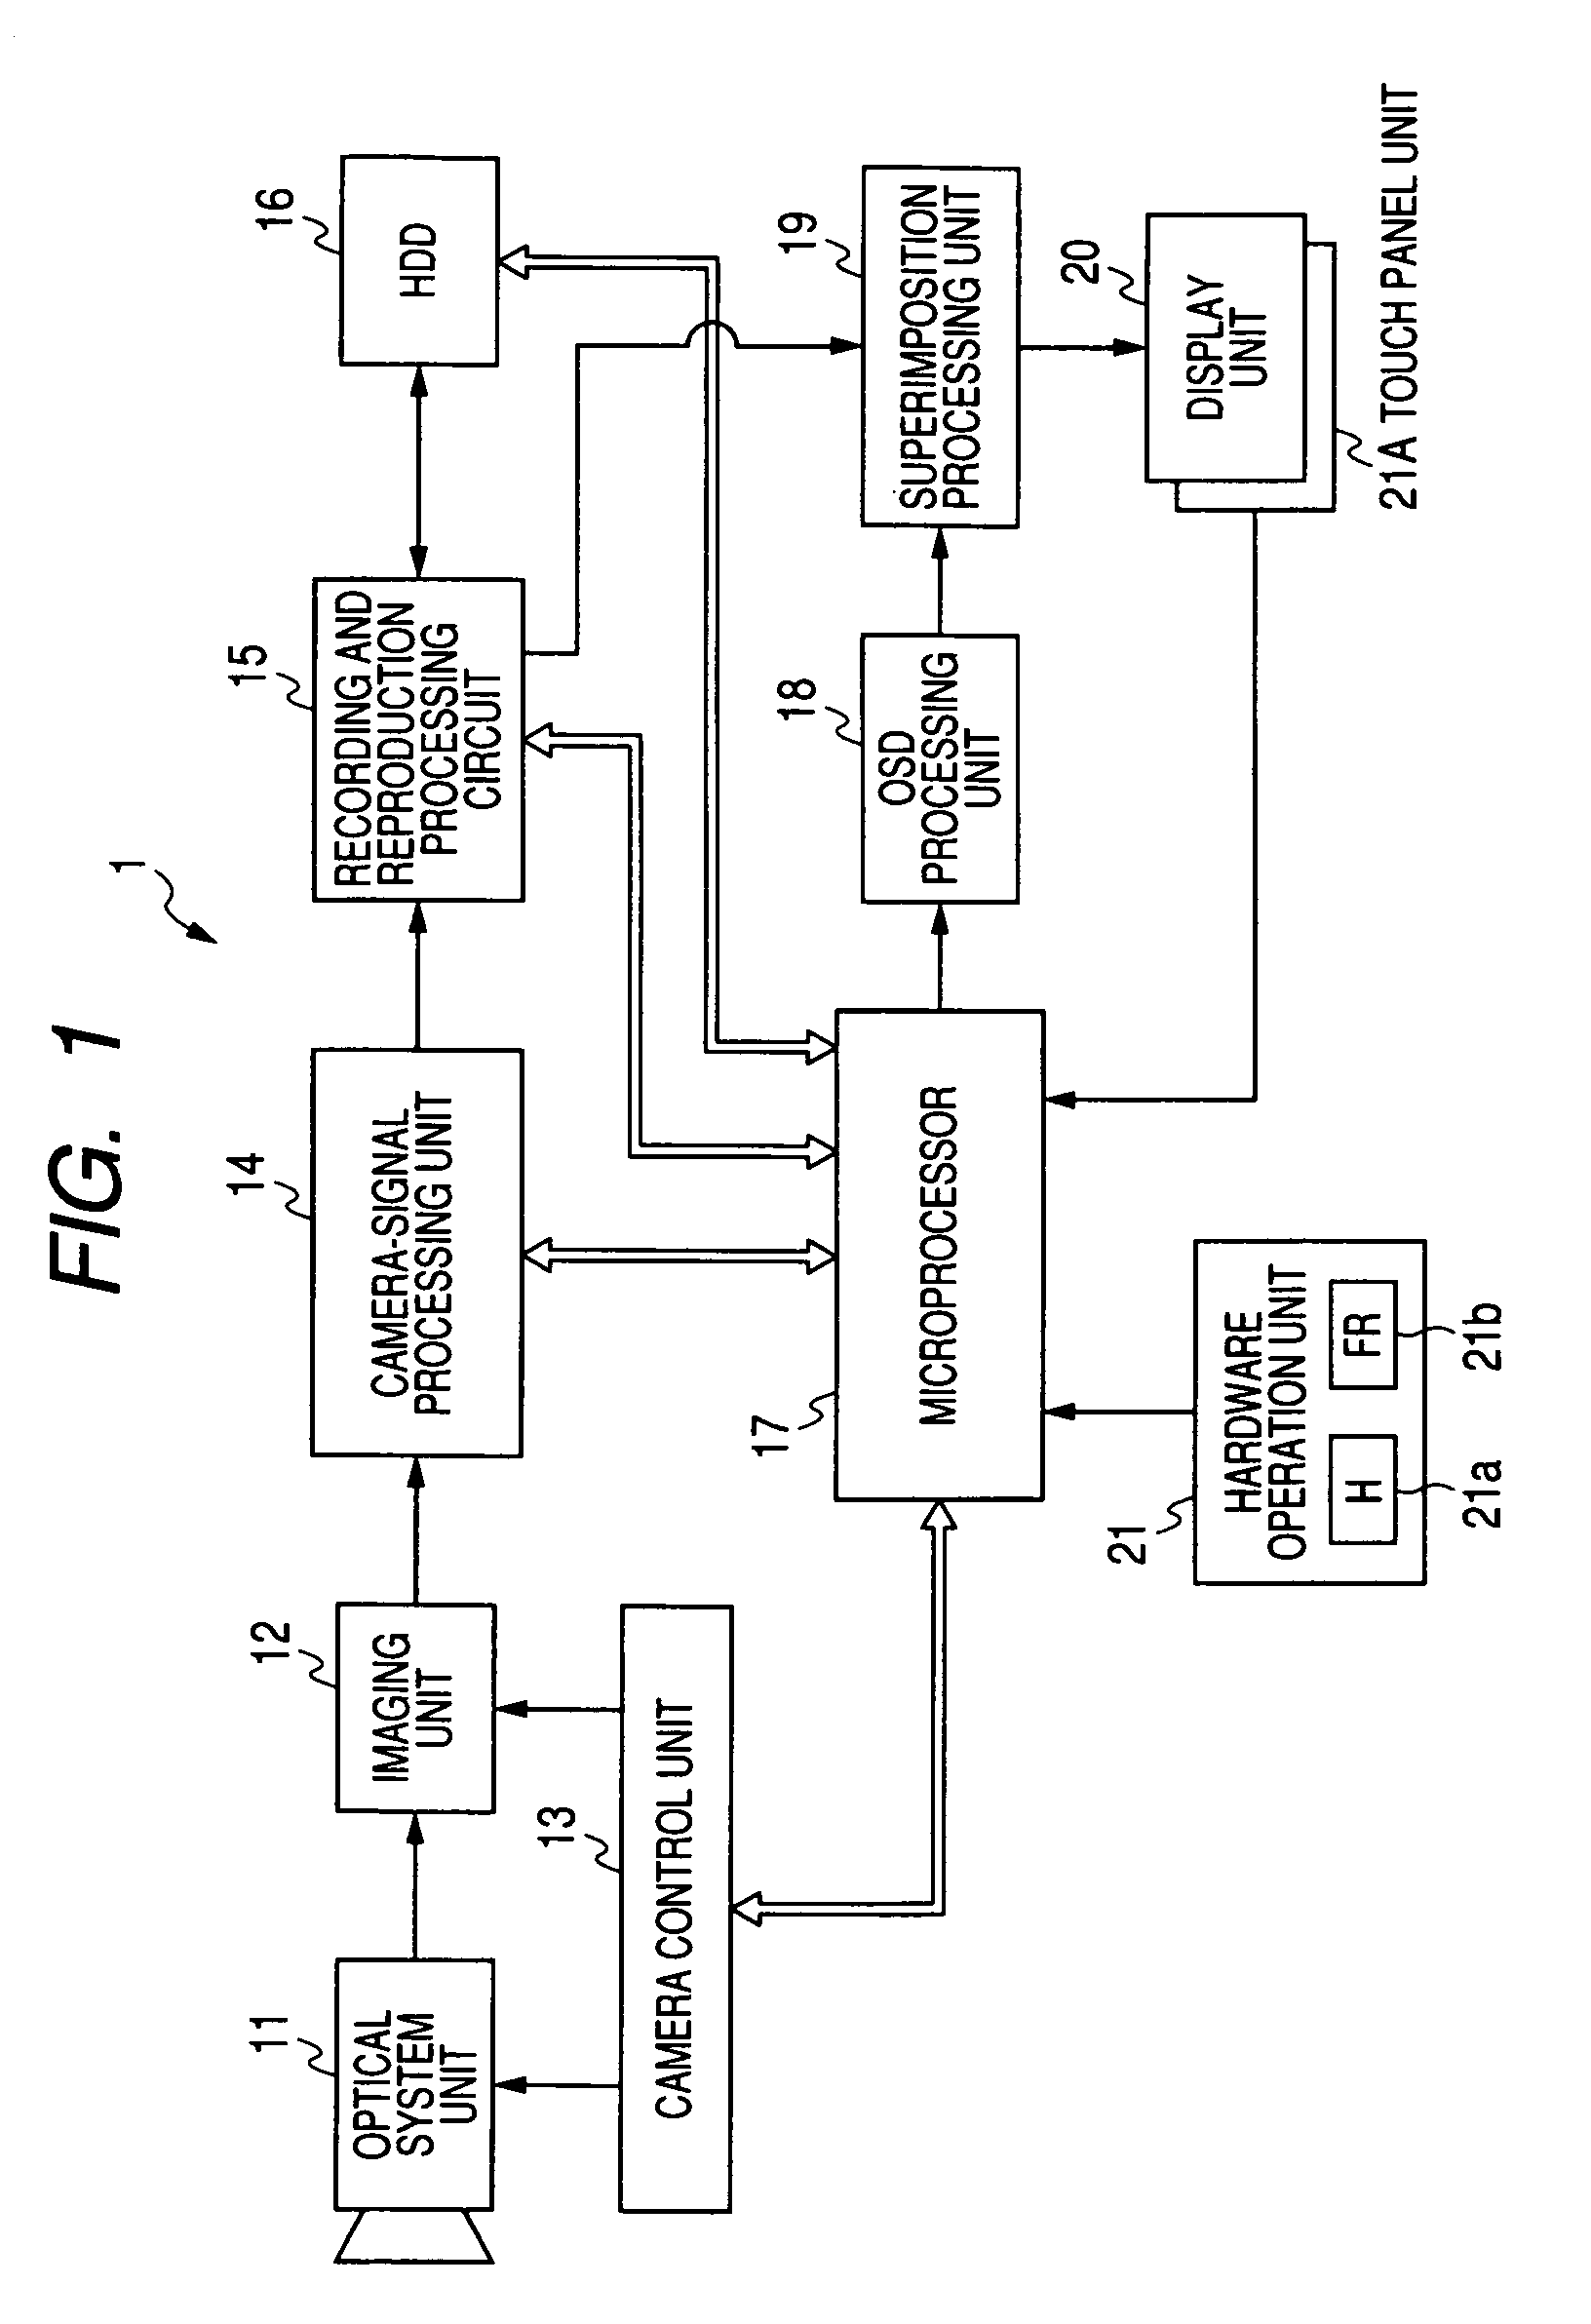 Display control apparatus, display control method, and program therefor